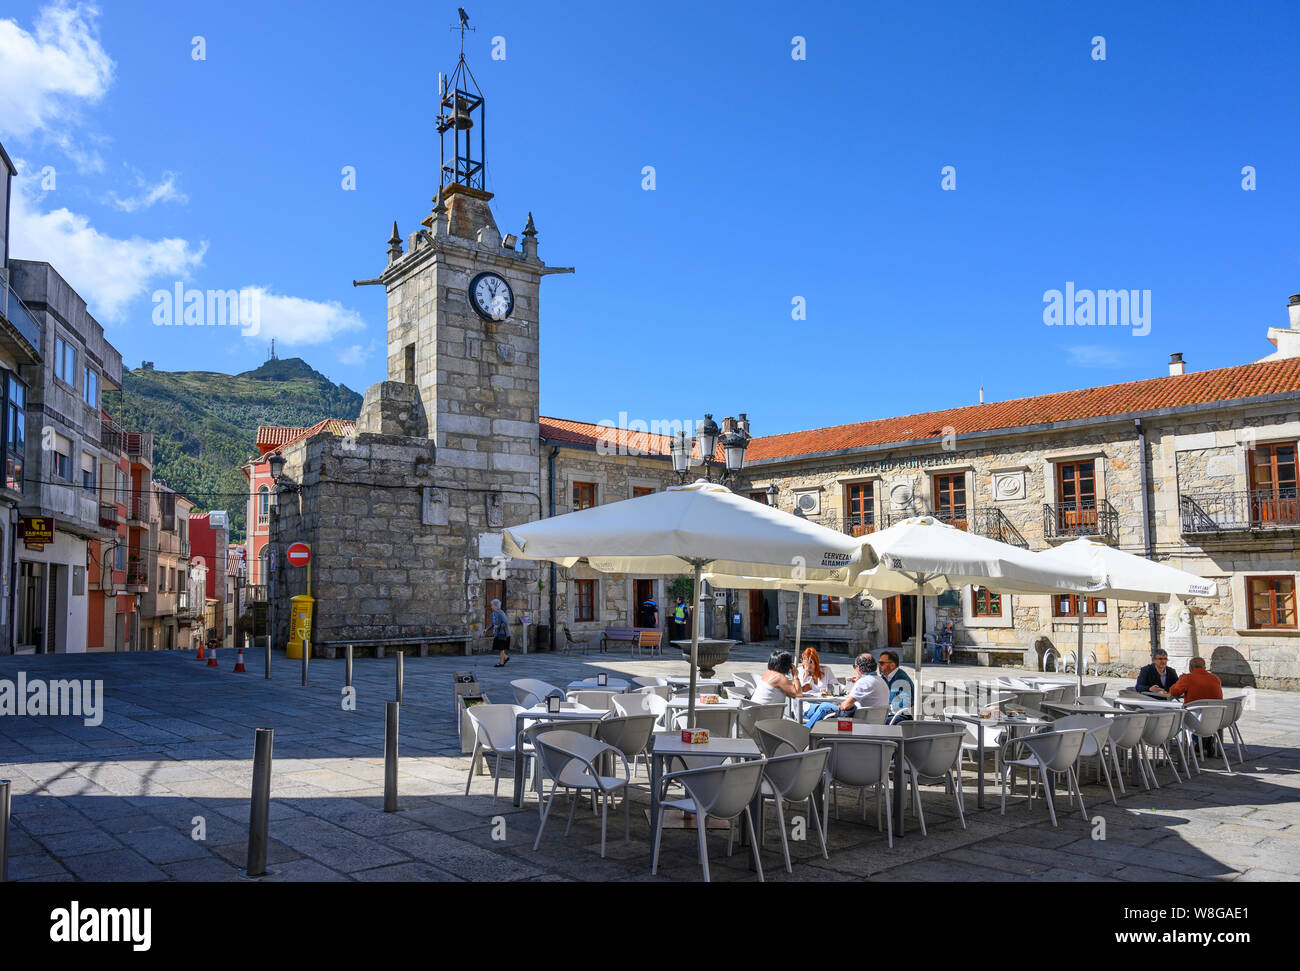 The  Torre del Reloj, clock tower, and the Praza Do Relo in the town of A Guarda, Pontevedra Province, Galicia, North West Spain. Stock Photo